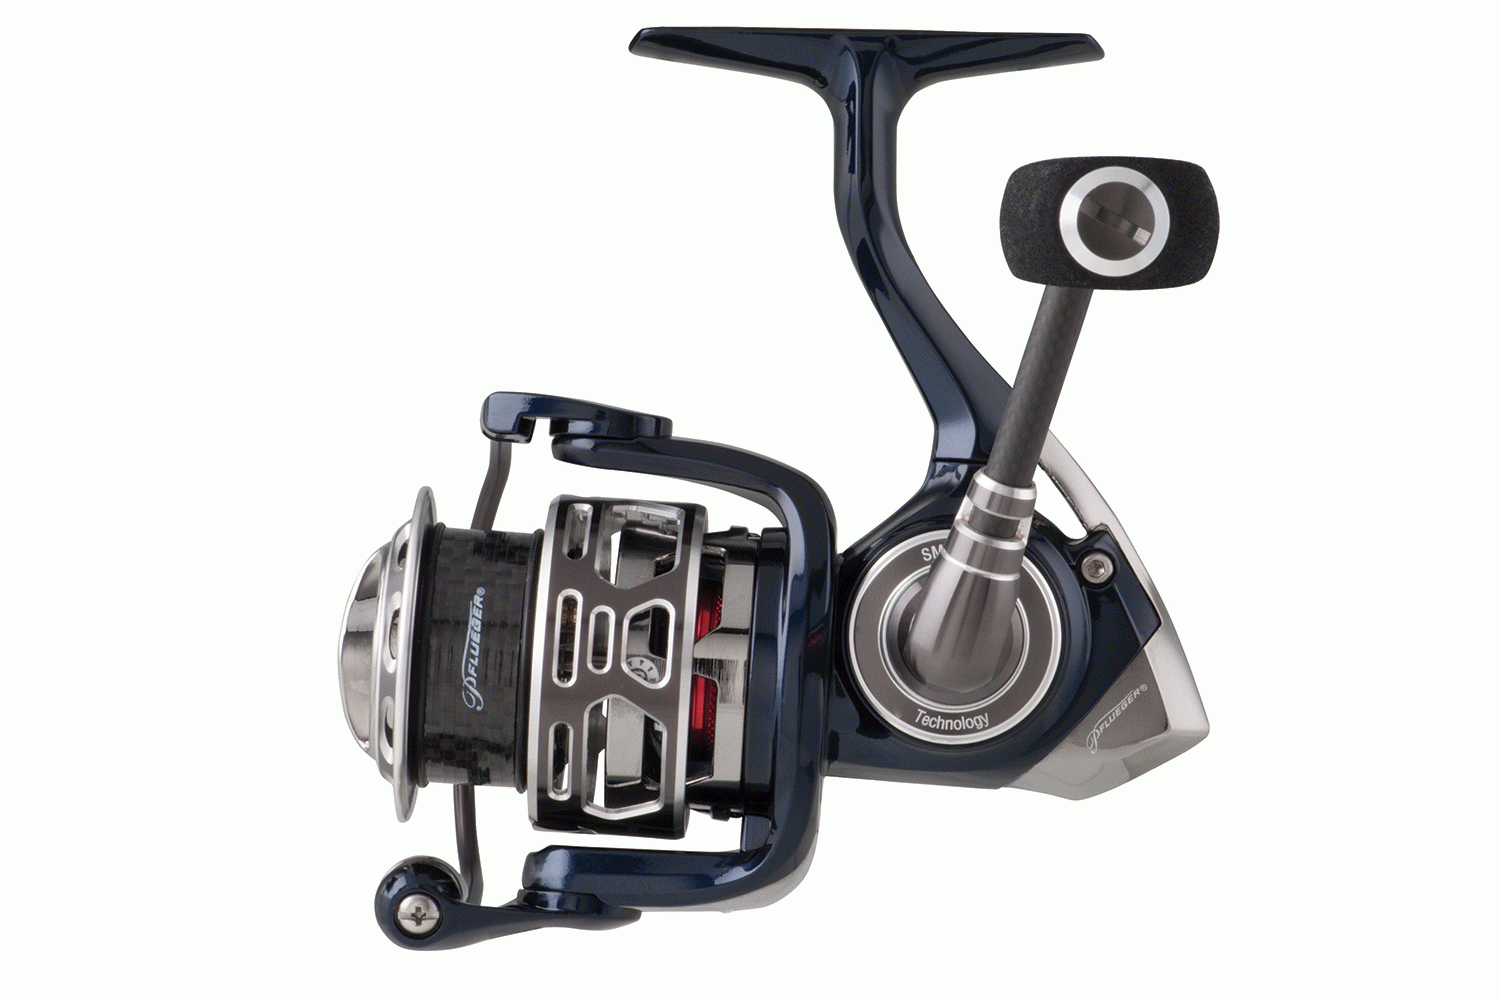 <p><b>Pflueger Patriarch, $199.99</b></p> SMARTretrieve Technology provides better line management with even line lay on the spool. SMARTgear Technology optimizes performance by gaining unmatched precision with gear alignment. Built on a magnesium body and rotor with a titanium mainshaft, the Pflueger Patriarch is light and durable for all day use.<br> <a href=